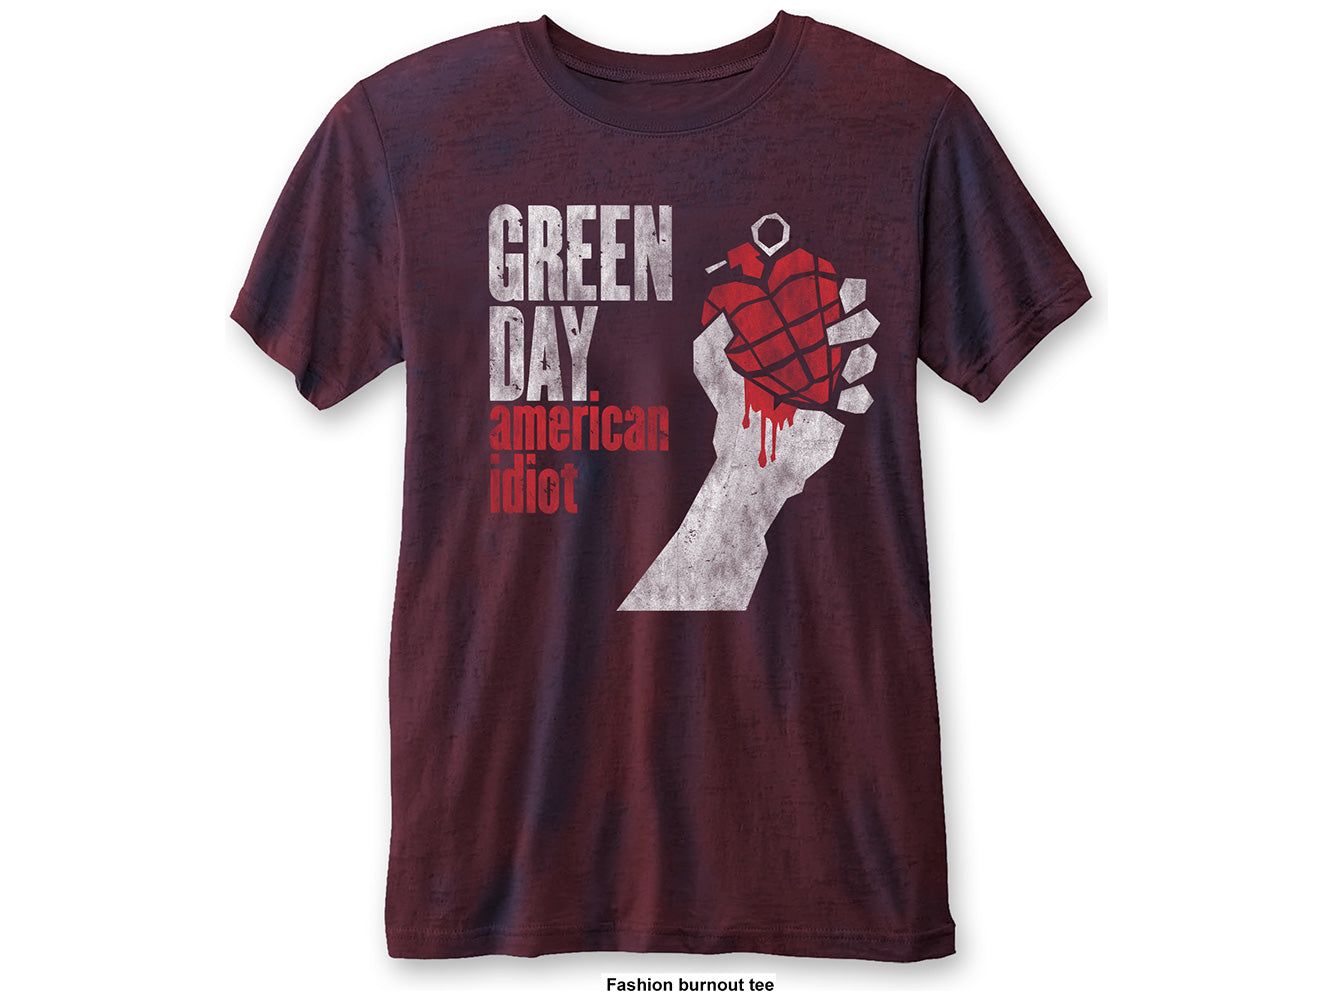 GREEN DAY UNISEX T-SHIRT AMERICAN IDIOT VINTAGE